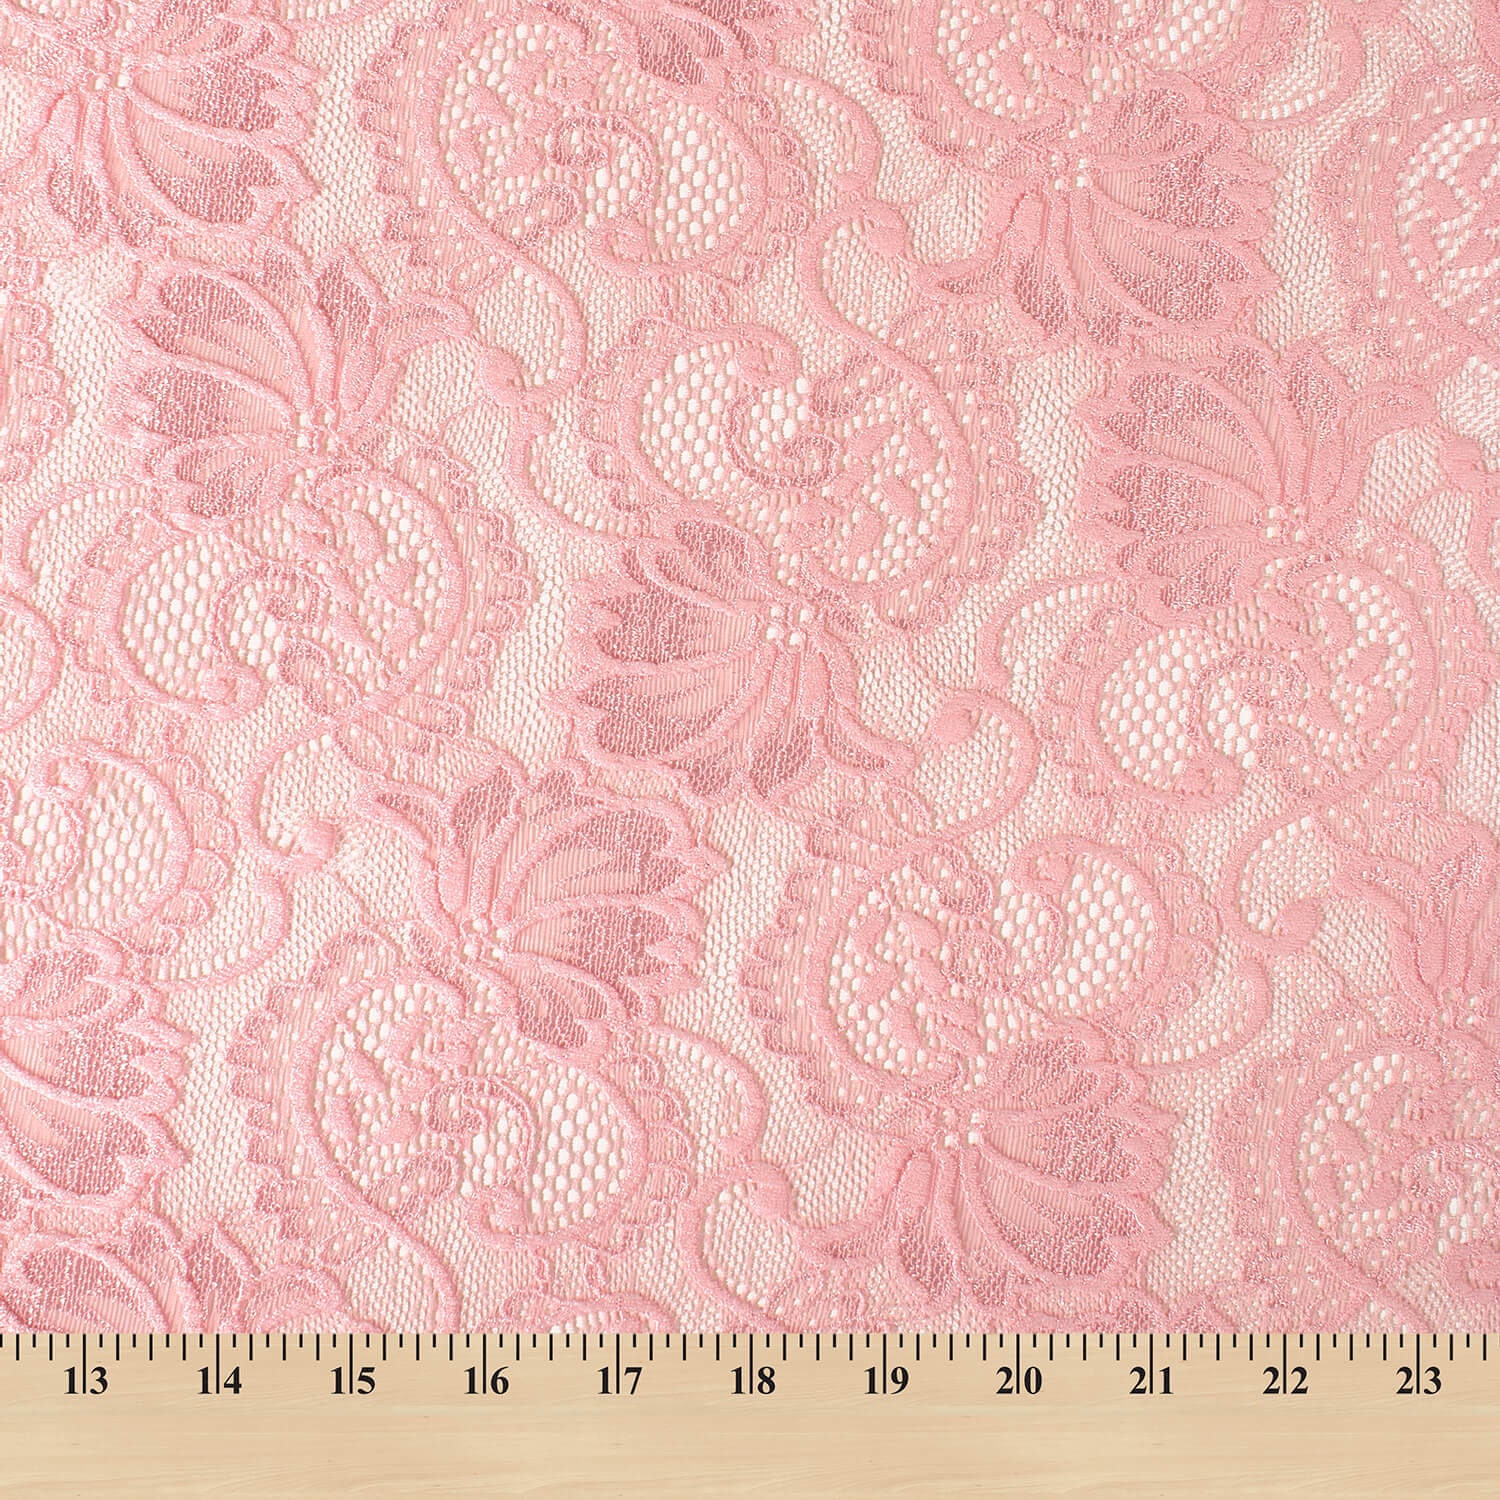 Pink Stretch Lace Fabric Floral Embroidery Poly Spandex 58 Wide BTY  Wedding Apparel Victoria